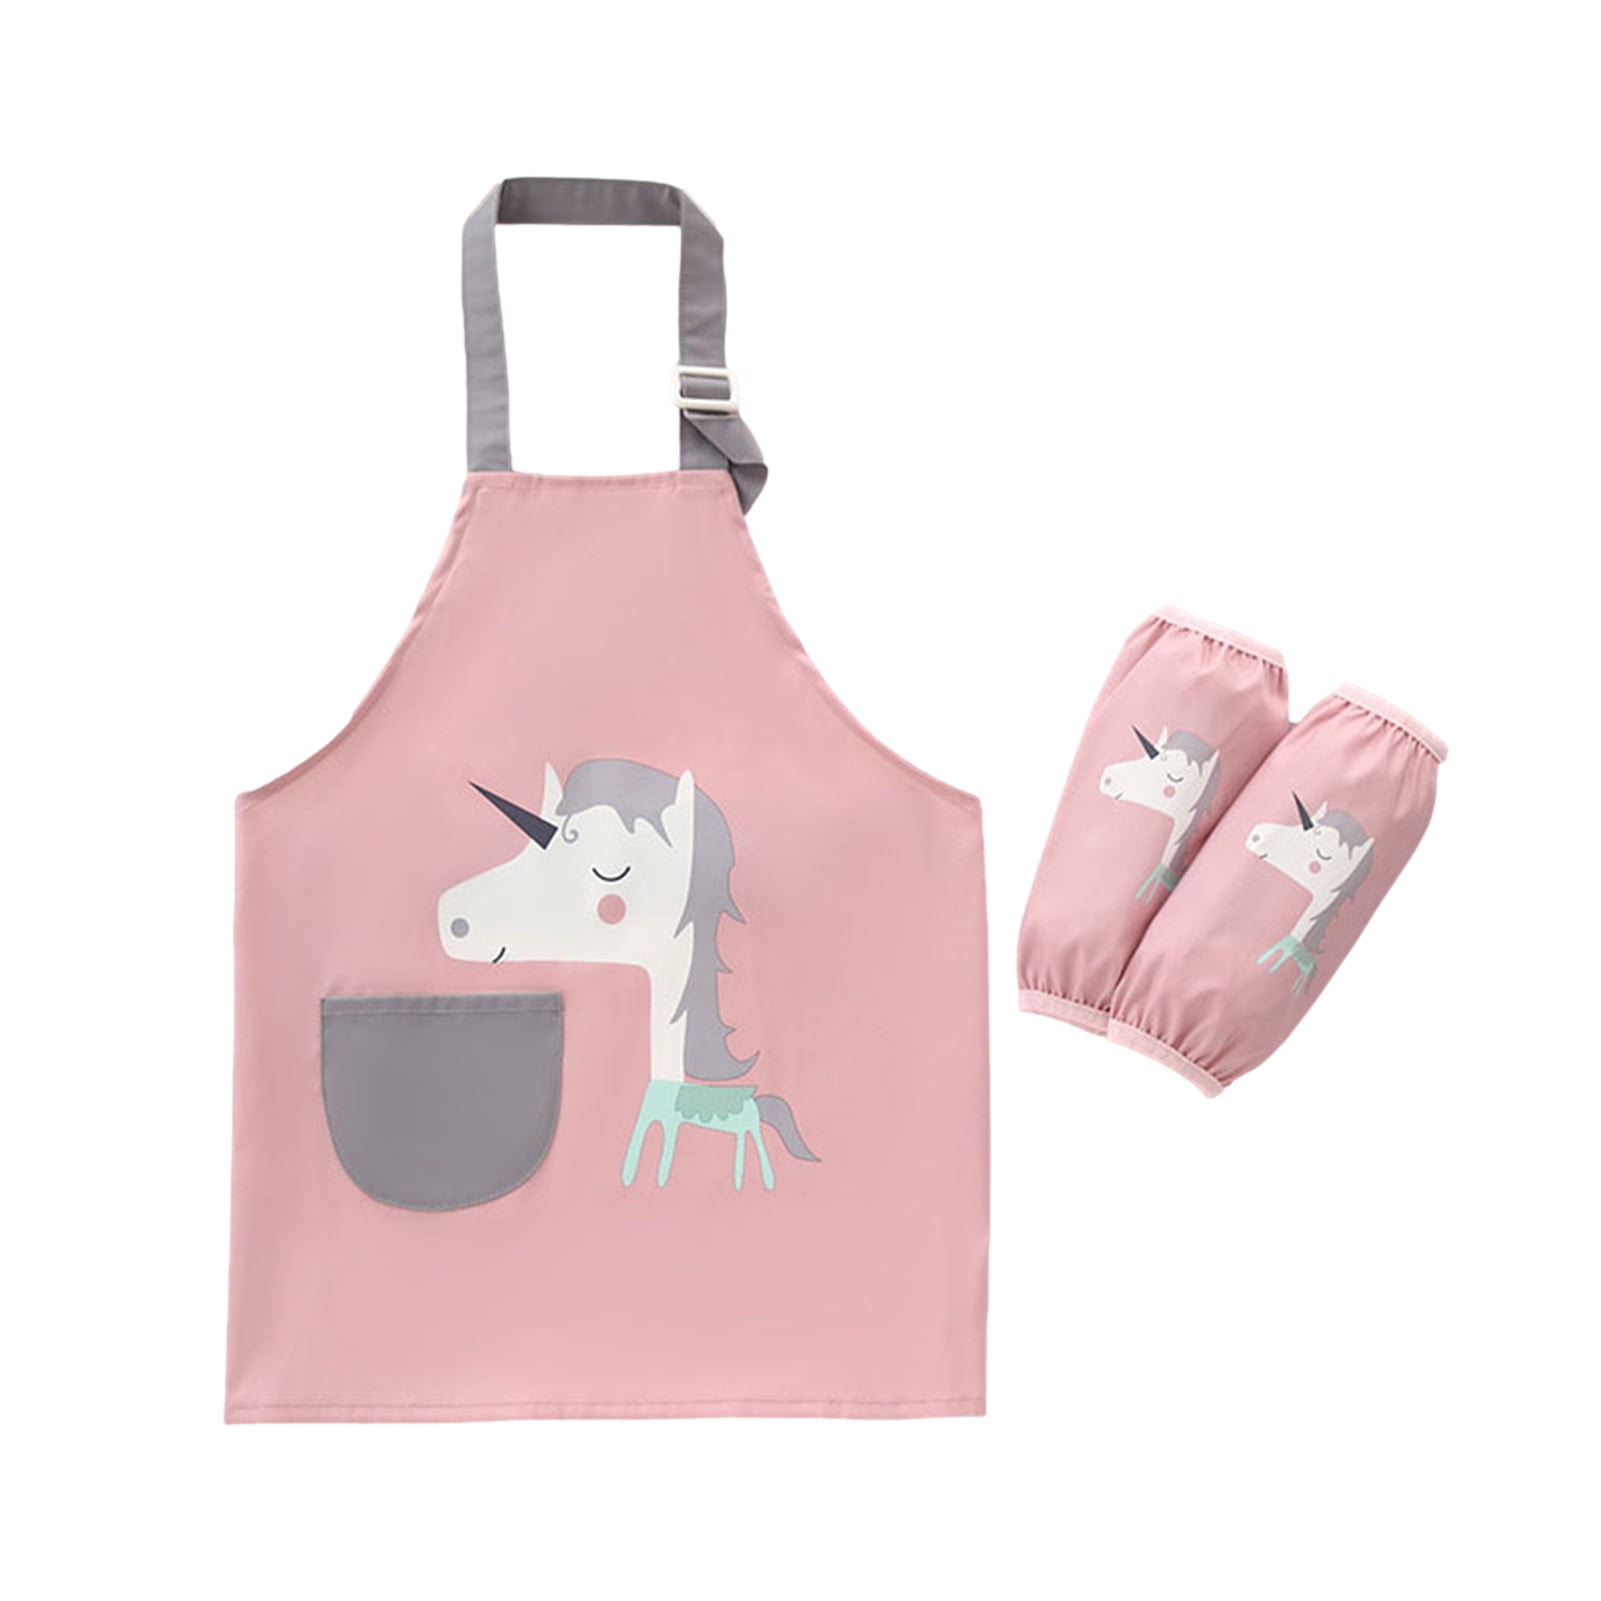 Childrens Play Apron Long Sleeve 42cm 1-2 Years For Painting Cooking School Home 